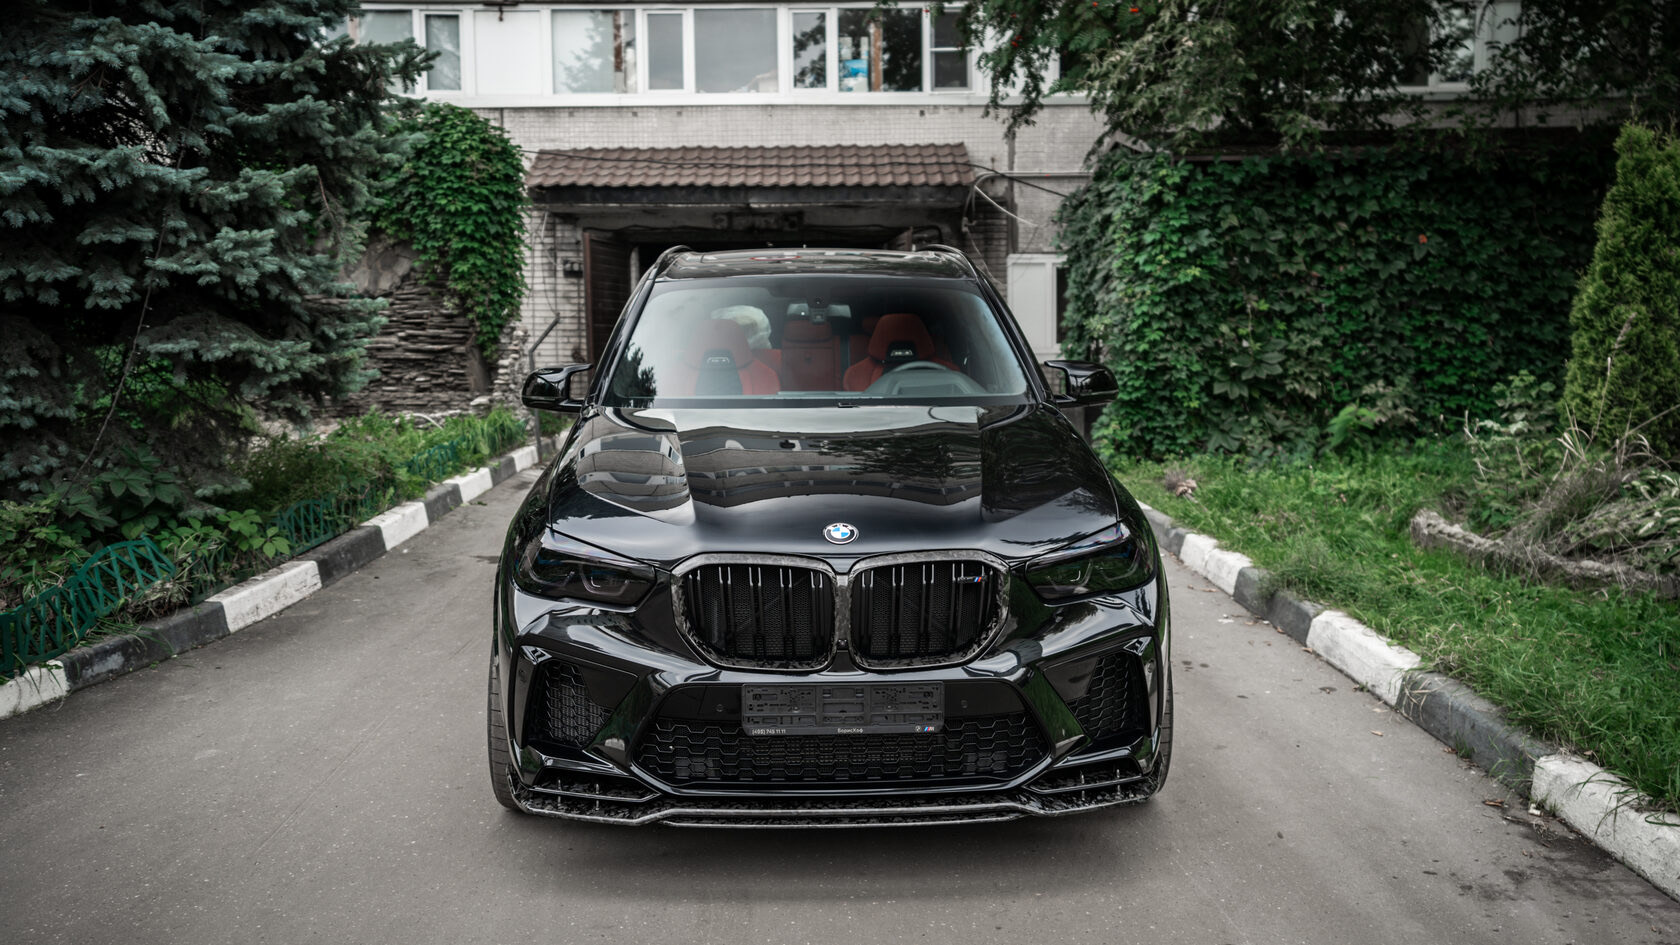 Check price and buy Forged Carbon Fiber Body kit set for BMW X5 M F95